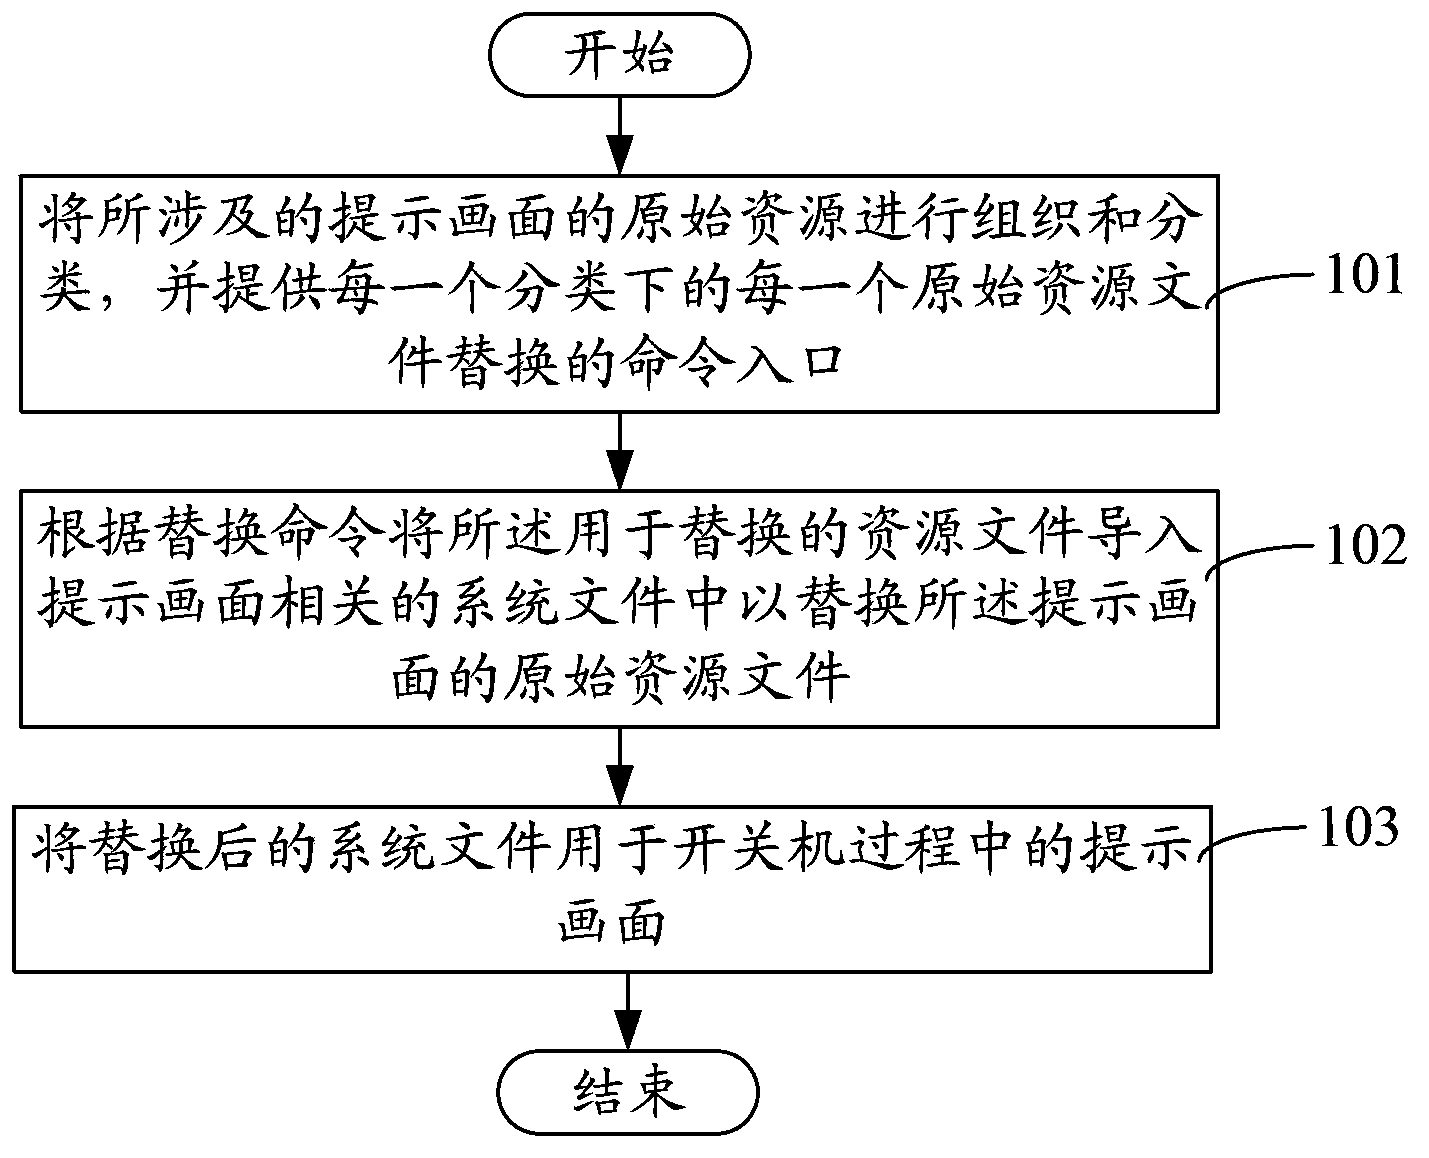 Method and device for replacing prompt pictures displayed during startup and shutdown of windows system